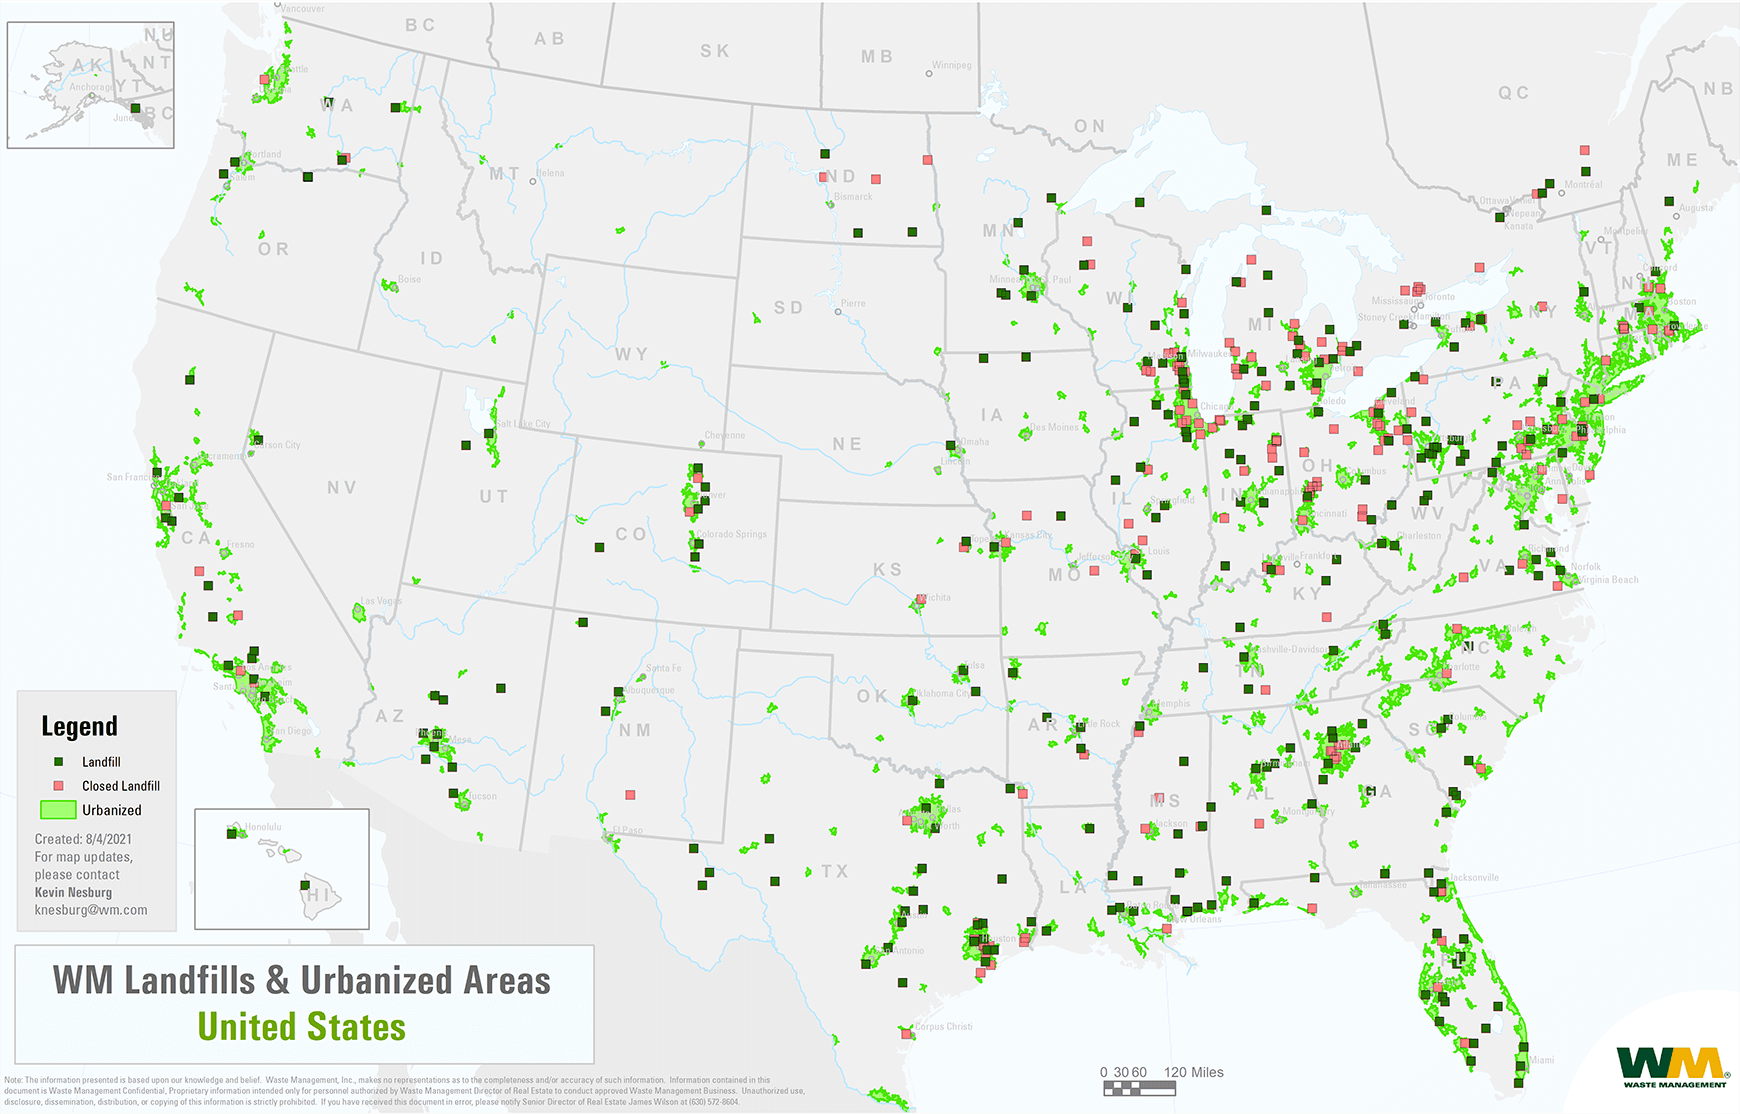 This map provides the locations of active and closed landfills that WM owns or operates and highlights urbanized areas.